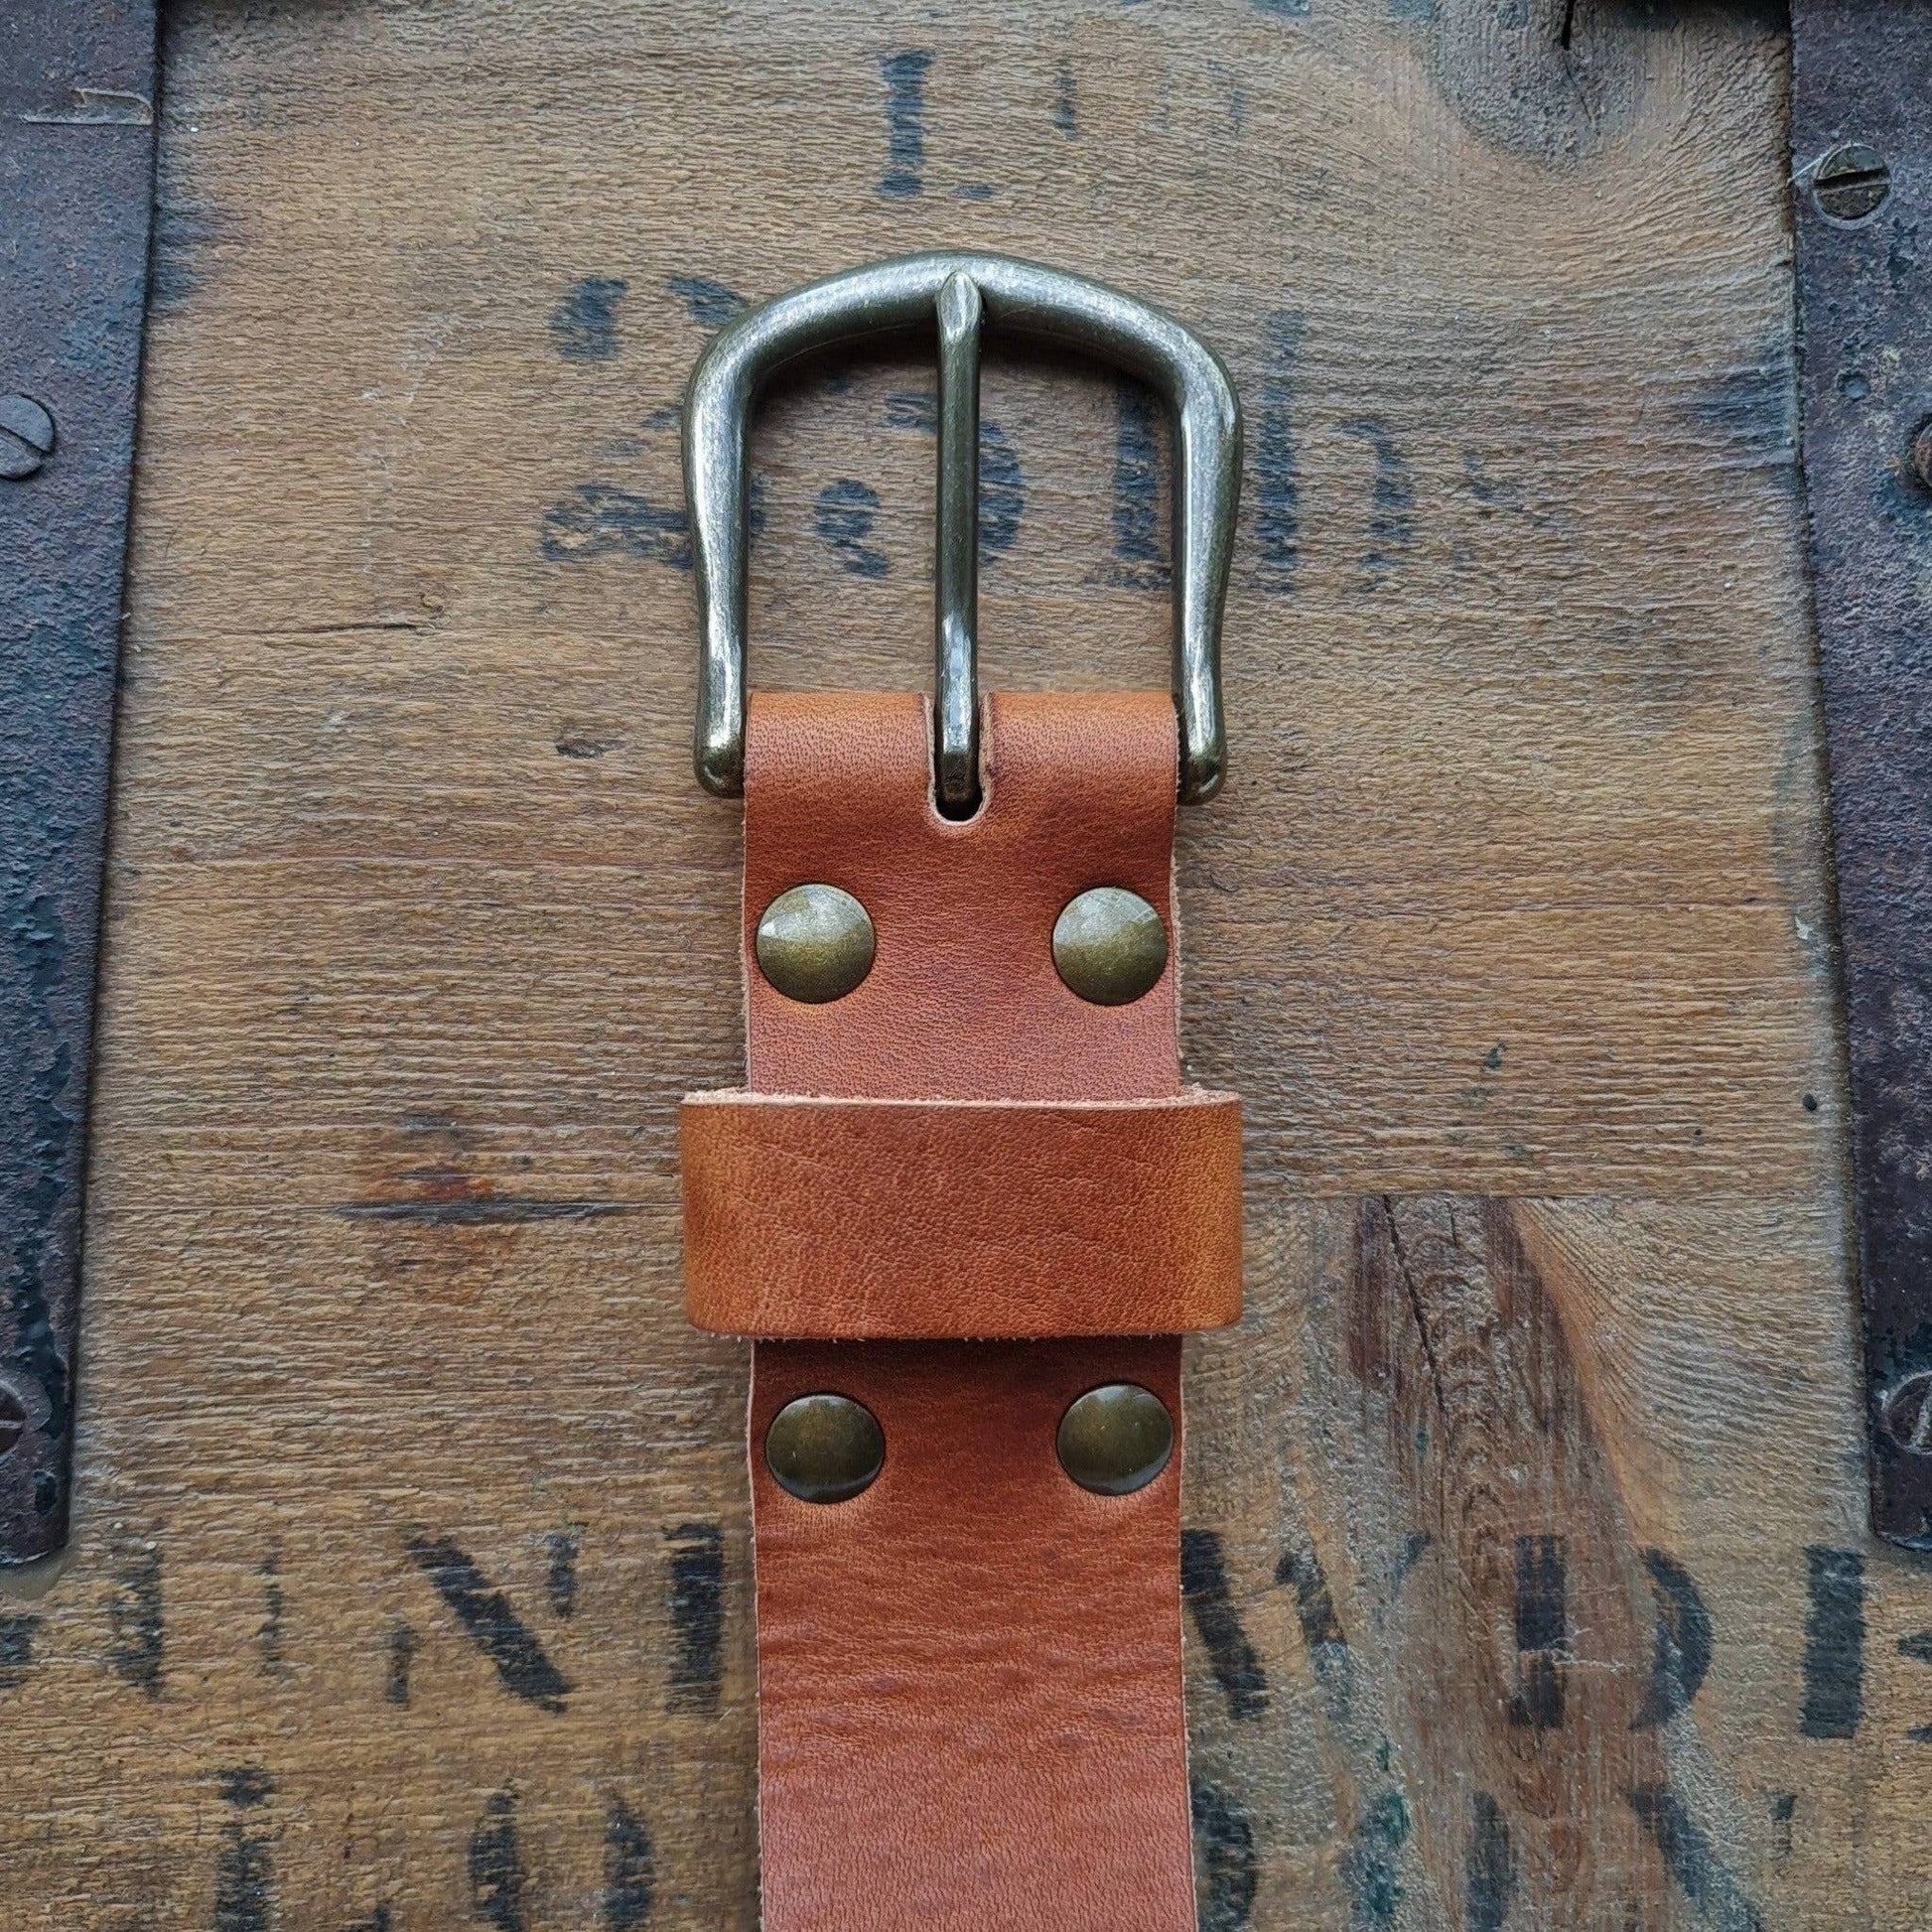 No. 8 Vaquero Full Grain Leather Belt, Horween English Tan Dublin Leather, Front